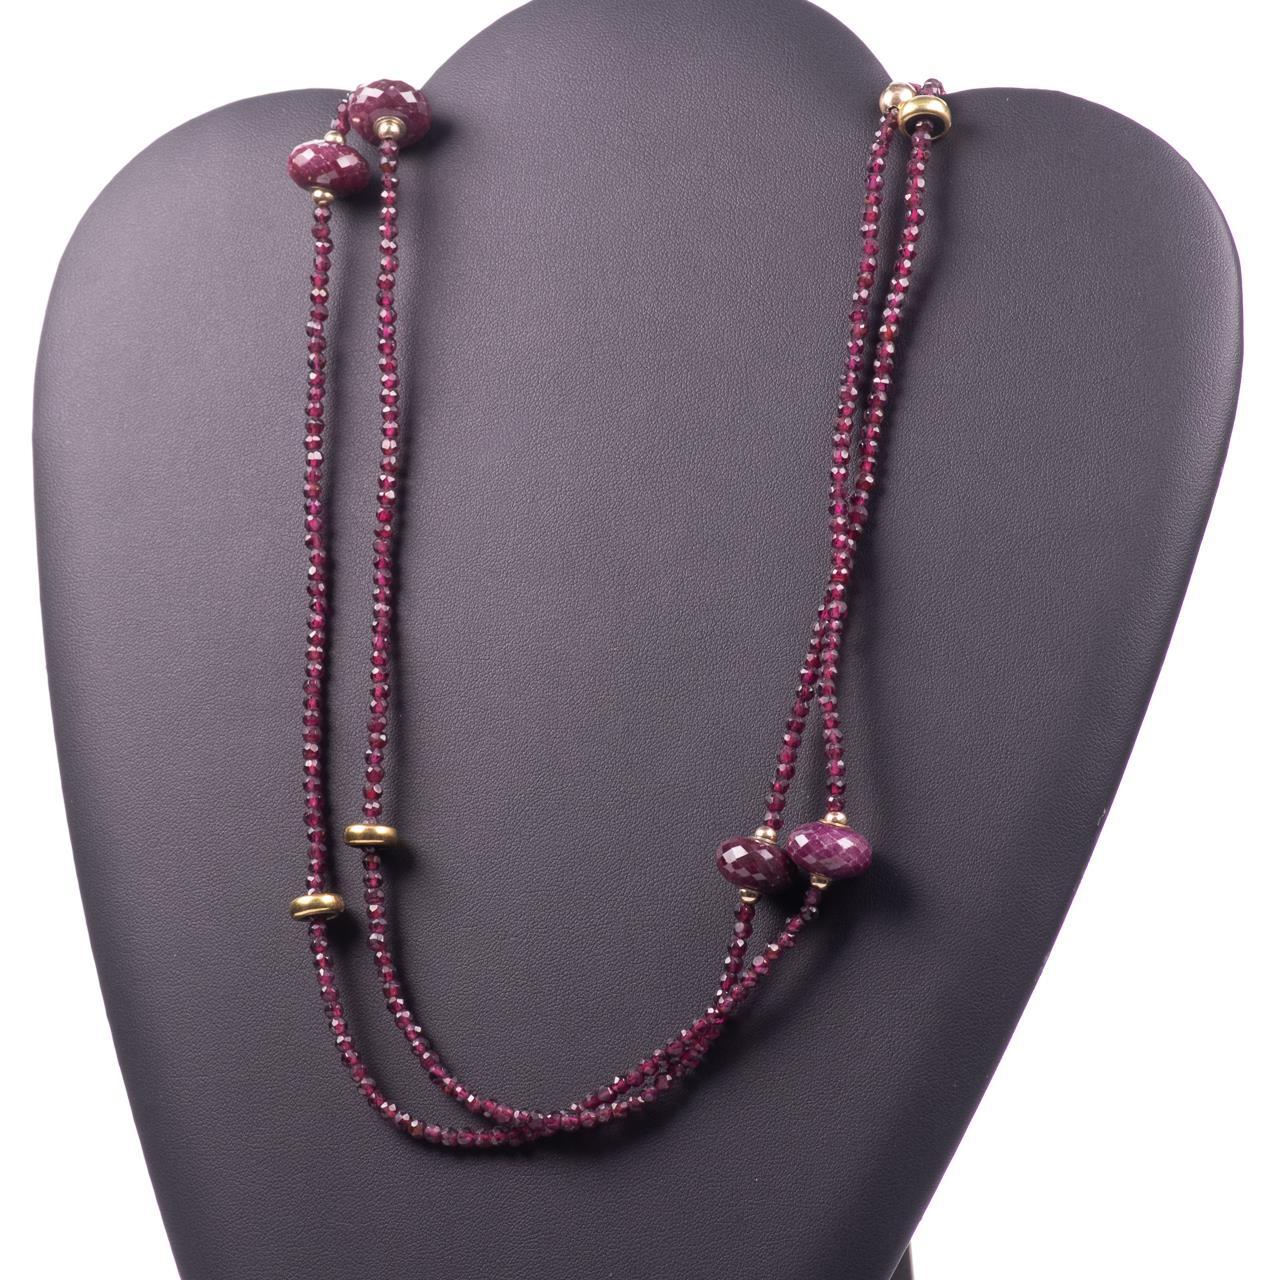 18KT Gold 300ct Rubies Art Deco Briolette-Cut Necklace

Necklace with rubies and yellow gold beads in between.Set with 500 briolette-cut rubies, measuring 3x3mm. Set with 6x larger briolette-cut rubies, measuring 15x9mm. Total ruby weight approx